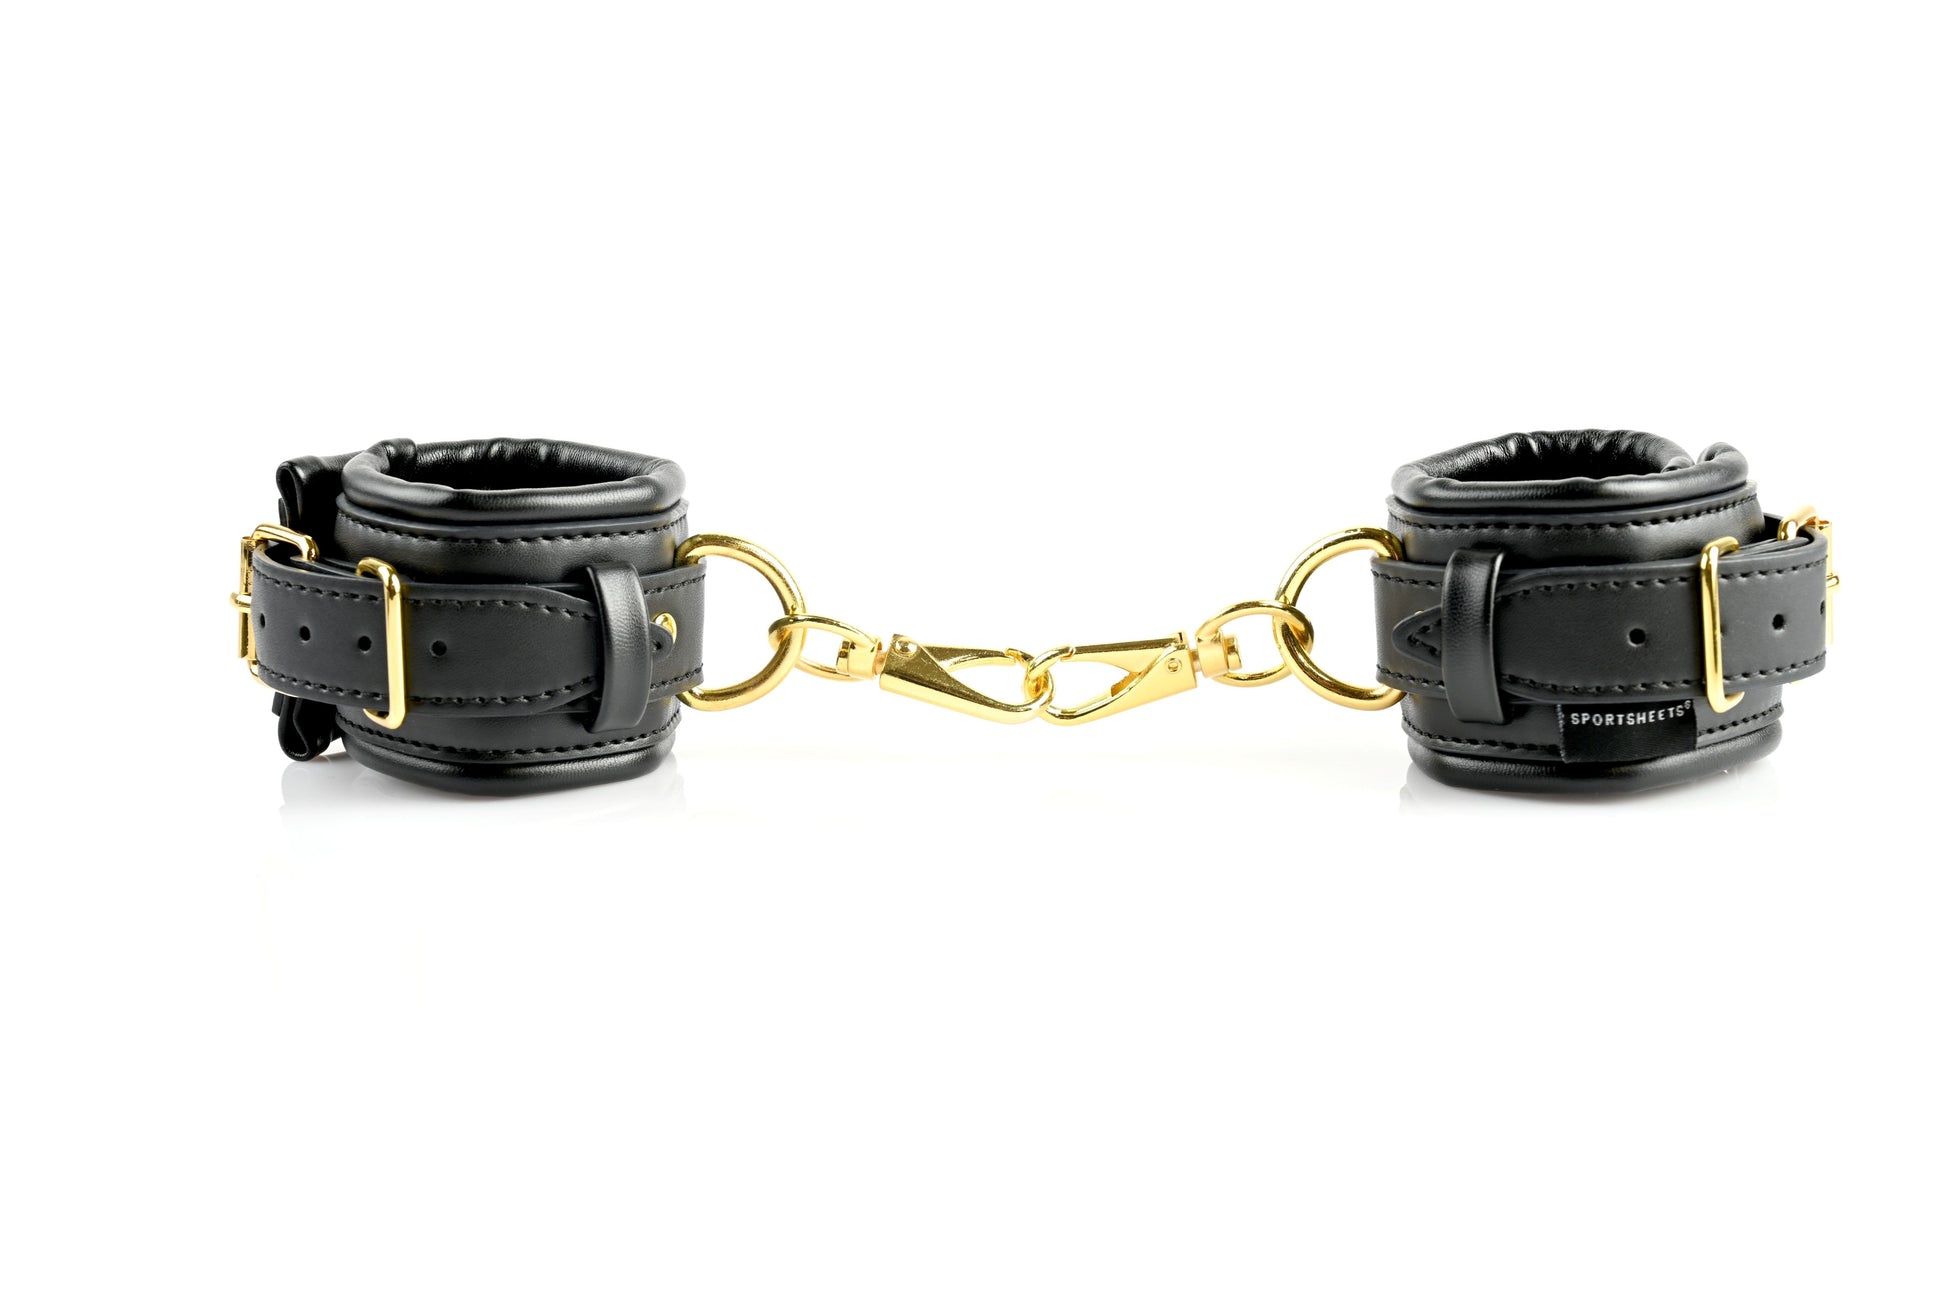 Front view of the cuffs showing how they can connect to each other.